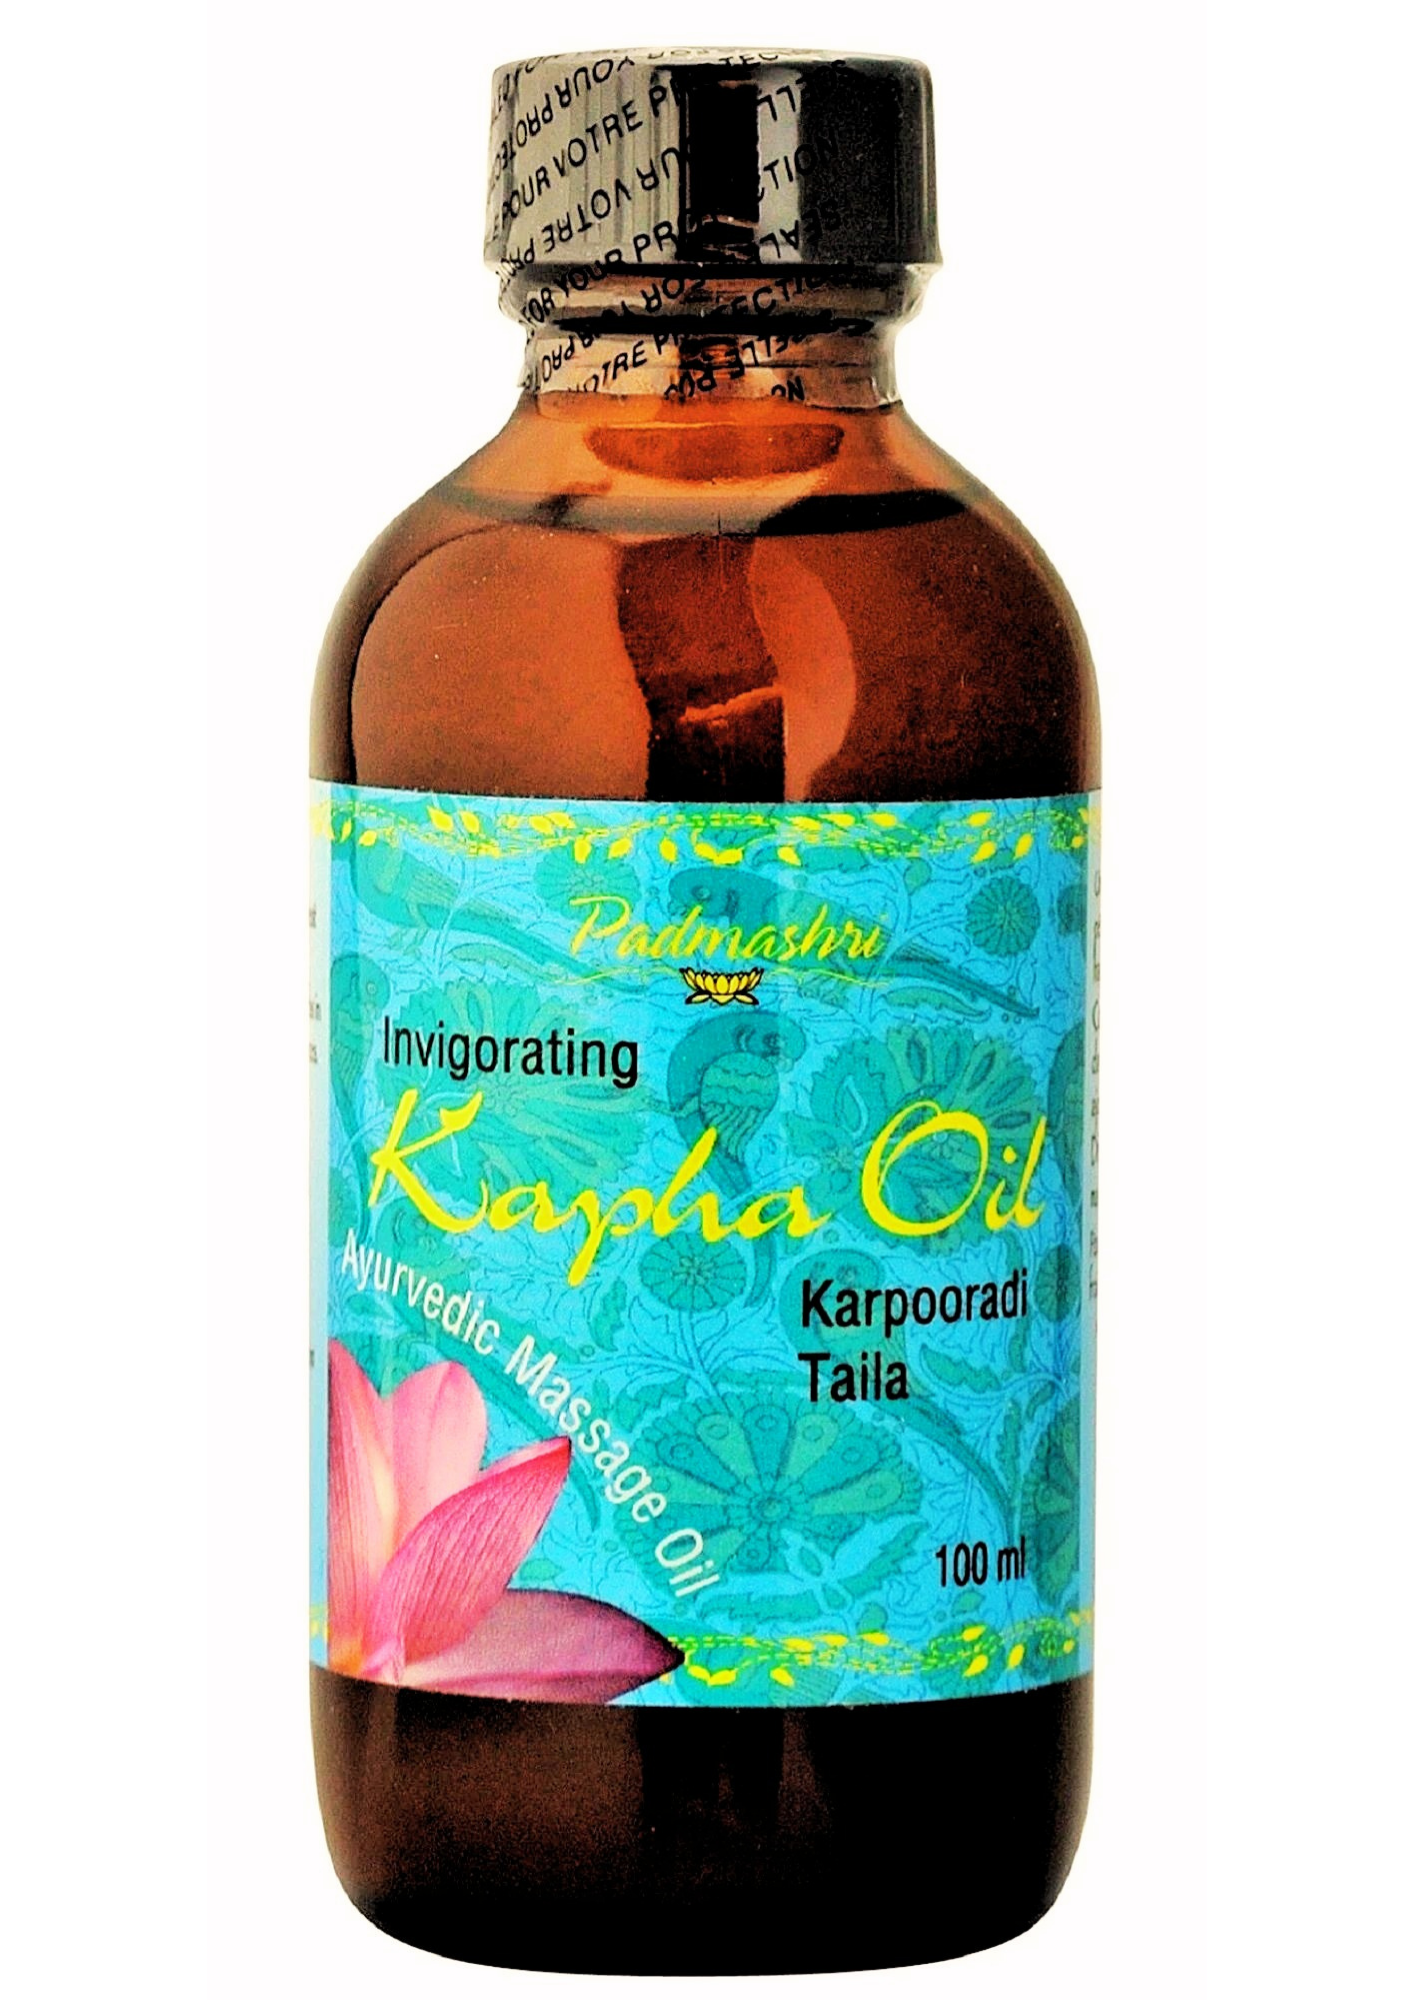 Ayurvedic Invigorating Kapha Massage Oil - Suitable for professional use in wellness clinics as well as self-care. Provides essential nourishment and moisture to the skin. Eco-friendly, cruelty-free and not tested on animals. Absorbs quickly to lock in moisture for superior hydration. Small quantities of these oils deliver undiluted nourishment.